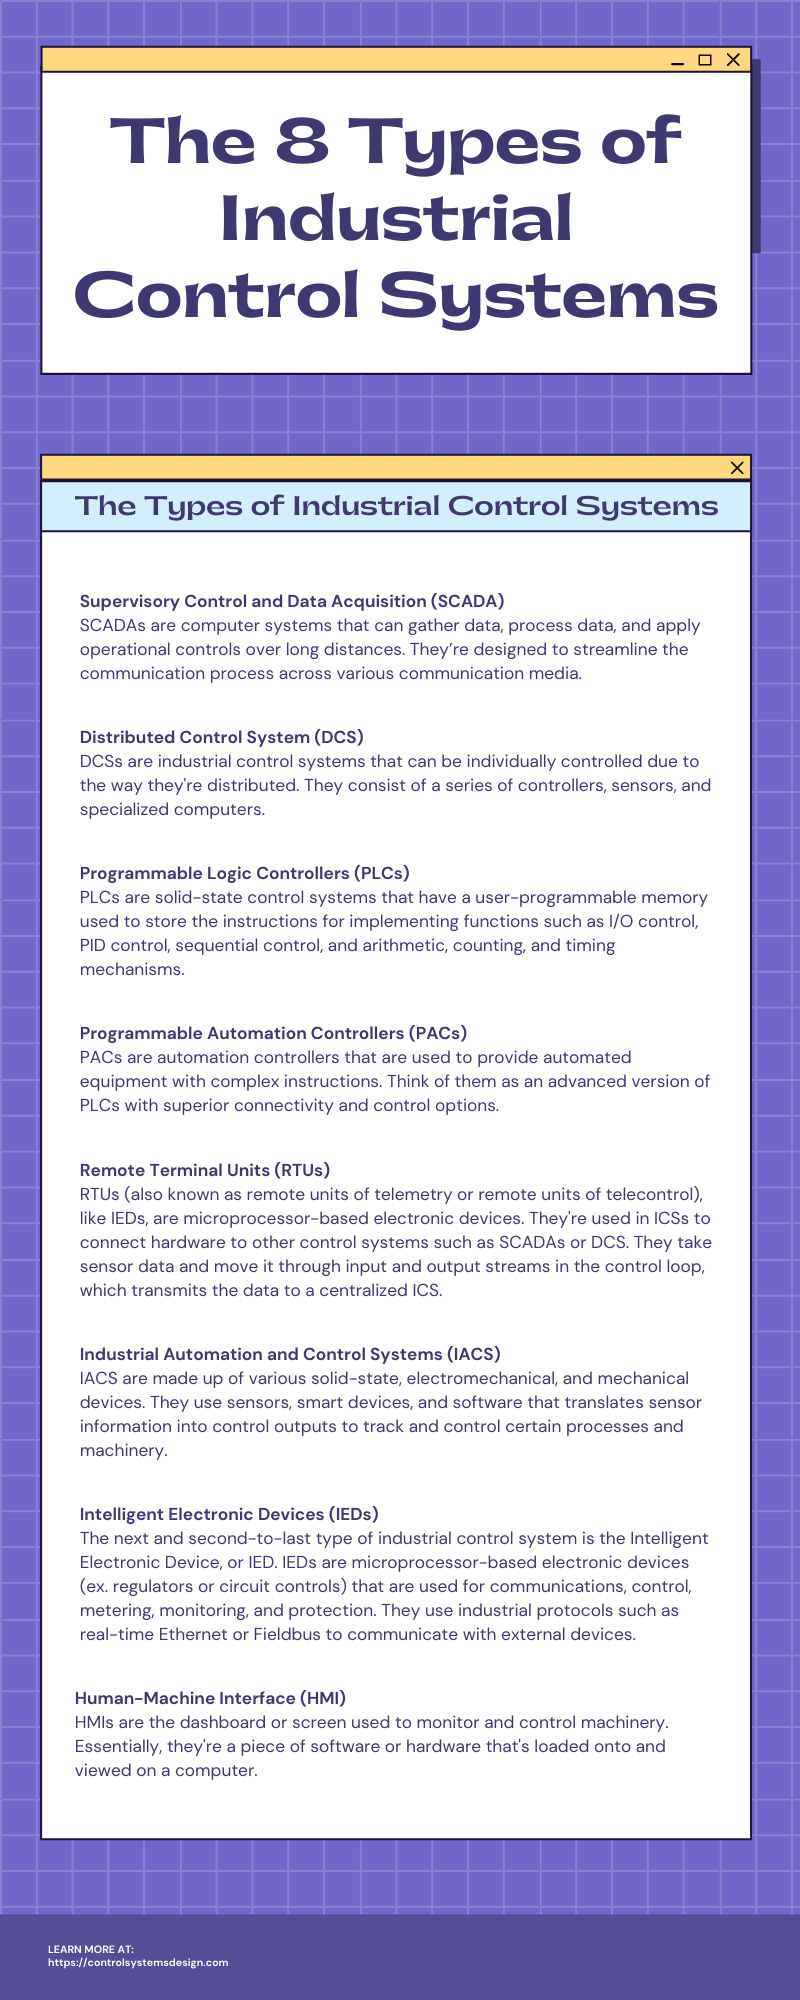 The 8 Types of Industrial Control Systems